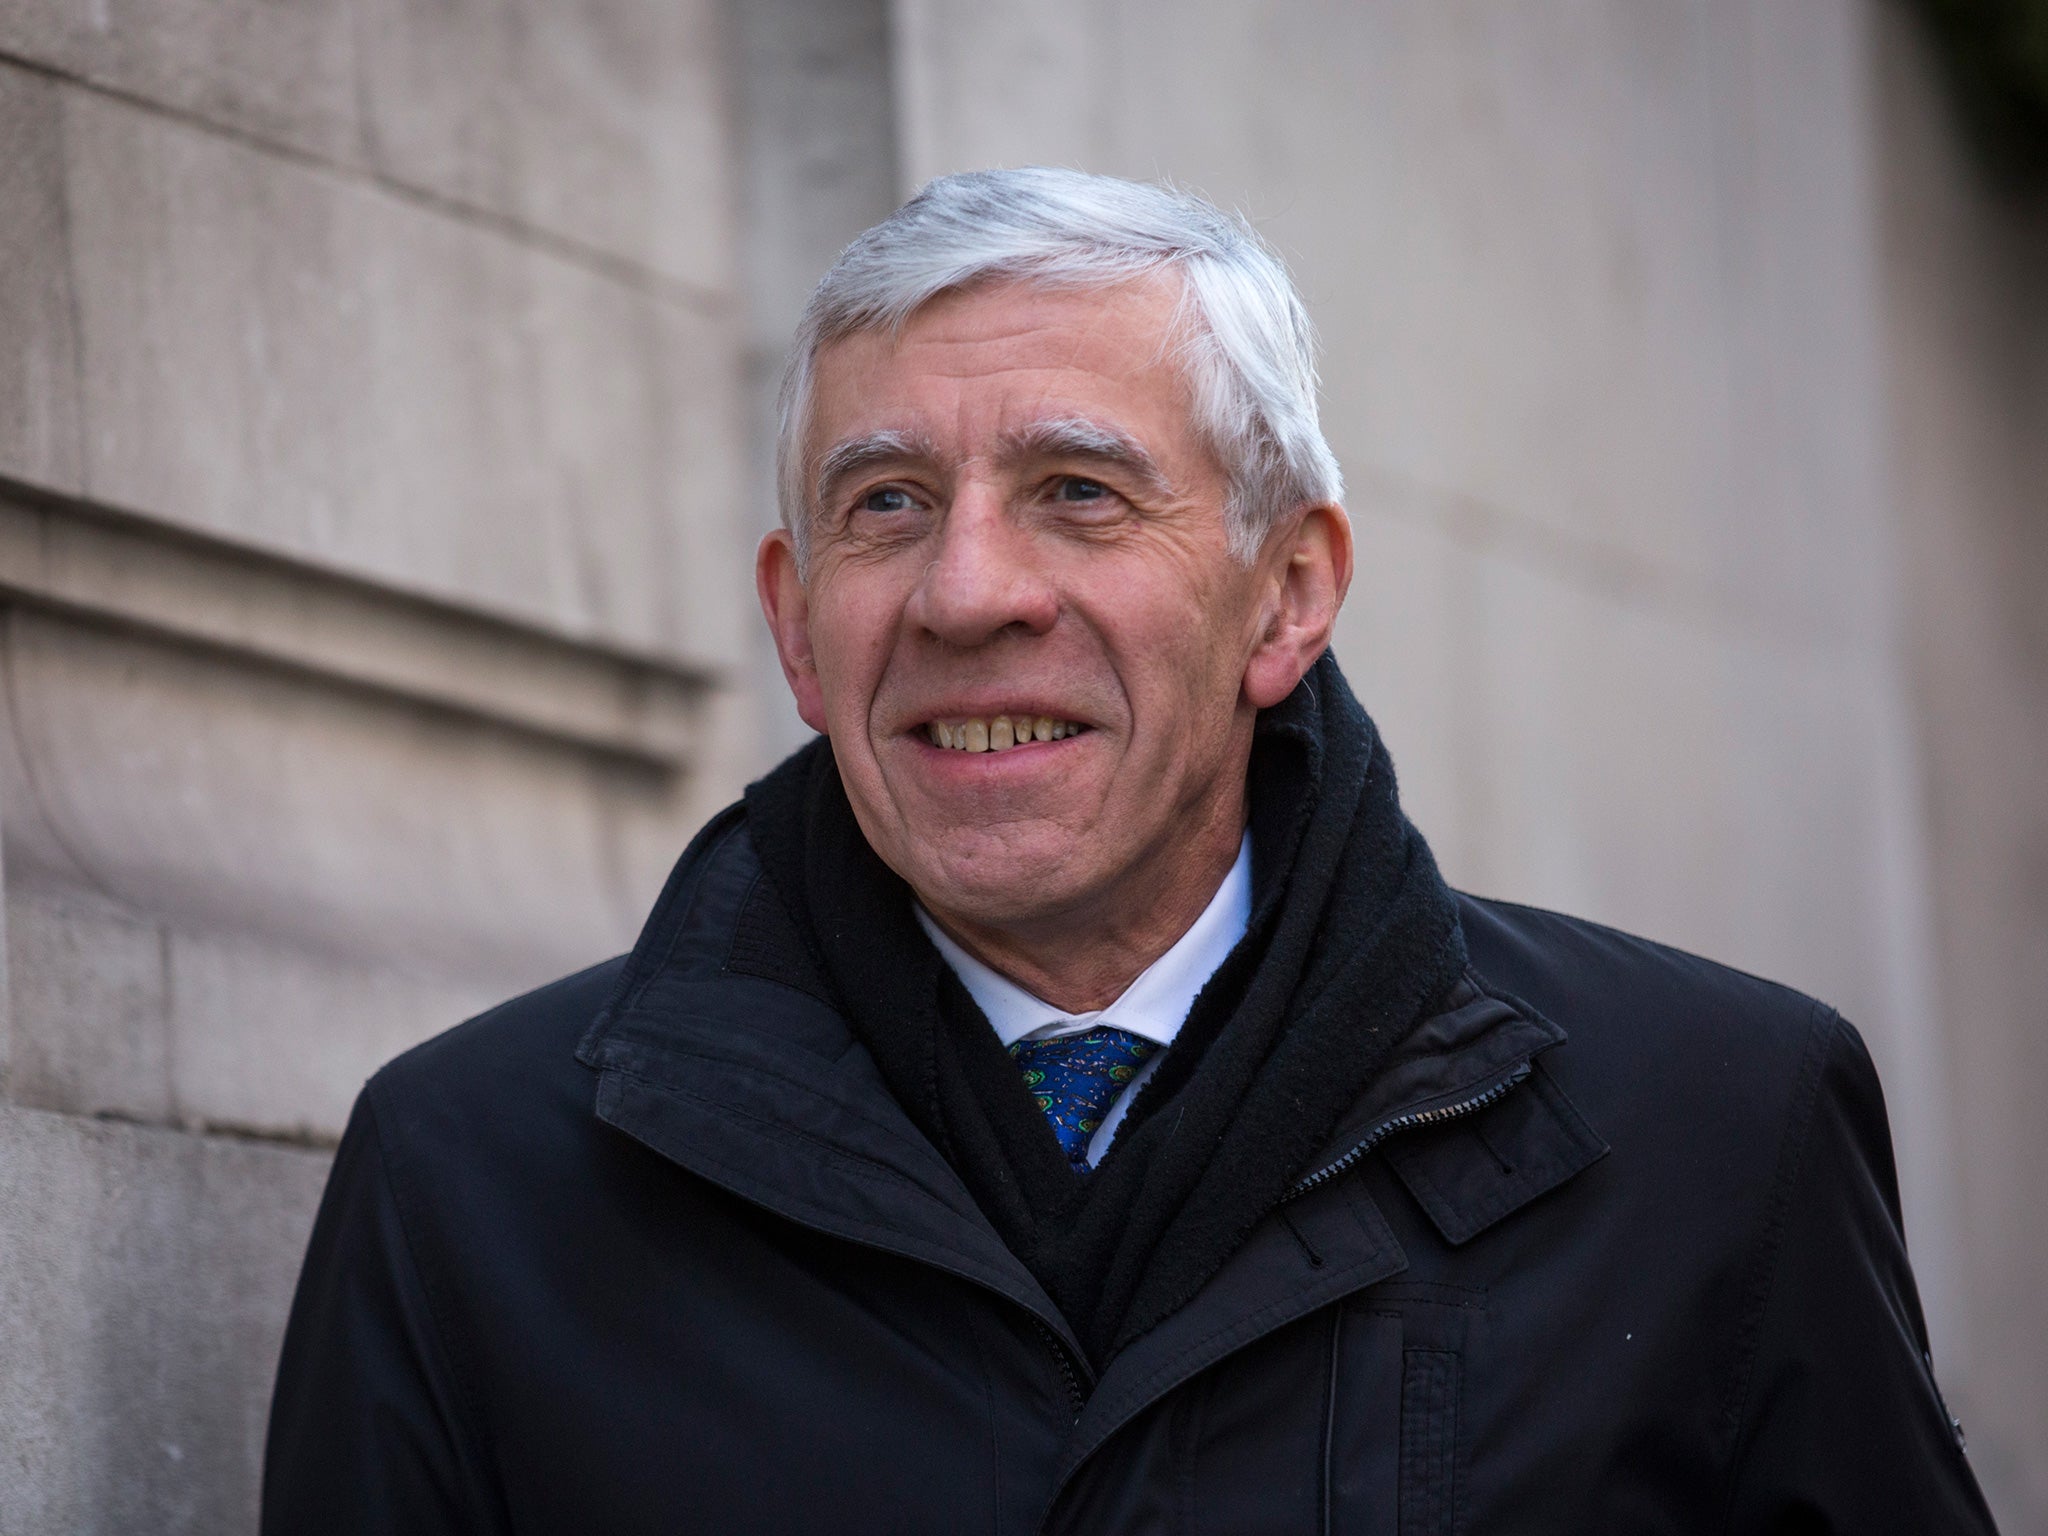 Jack Straw will be part of the committee charged with reforming FoI Act